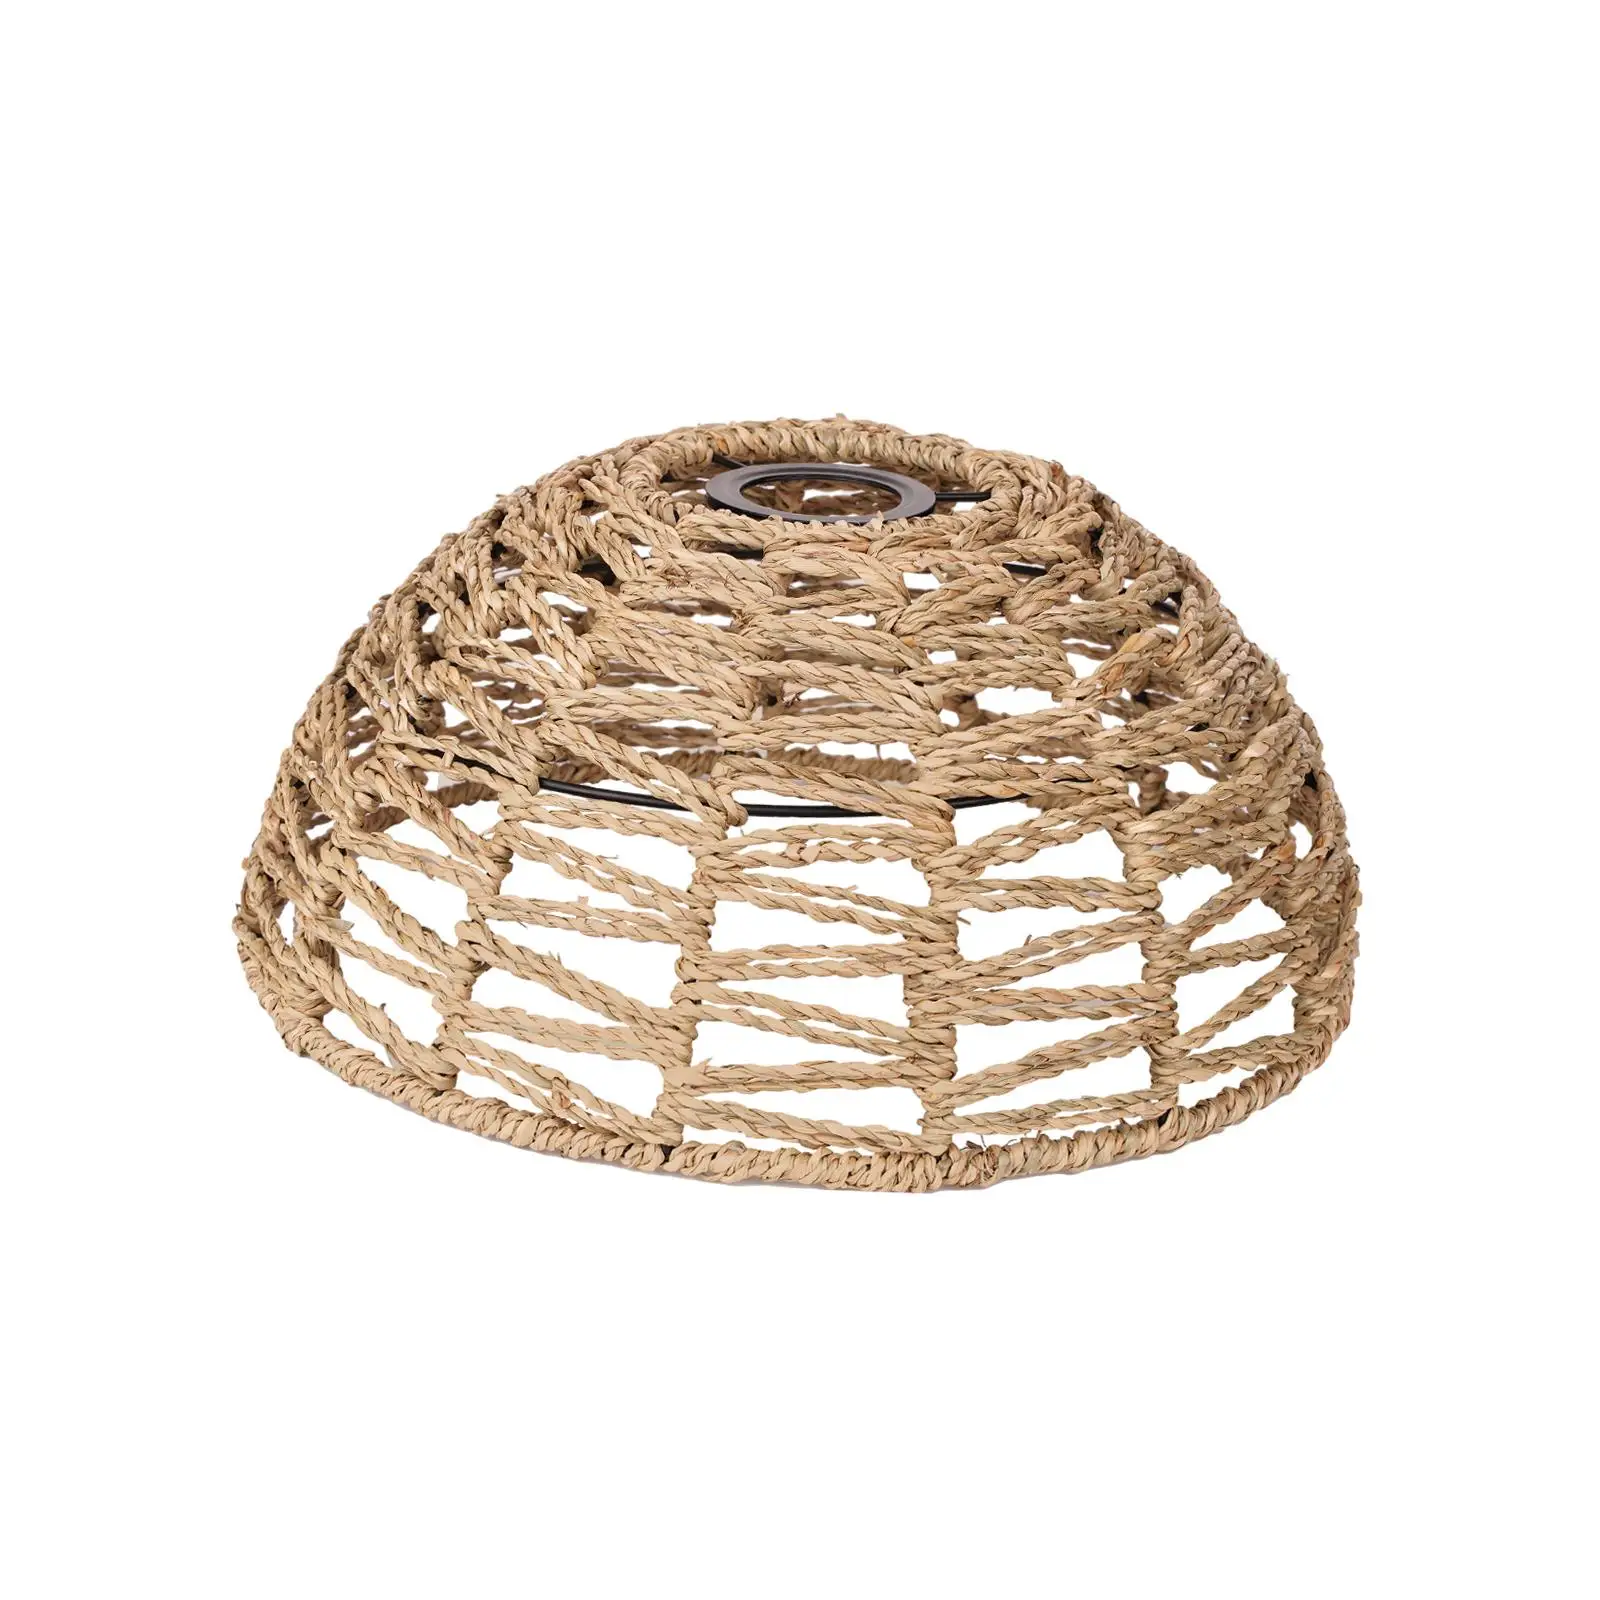 Rope Woven Lampshade Dustproof Accessories Decor Elegant Light Fixture Lamp Shade for Kitchen Bedroom Dining Table Home